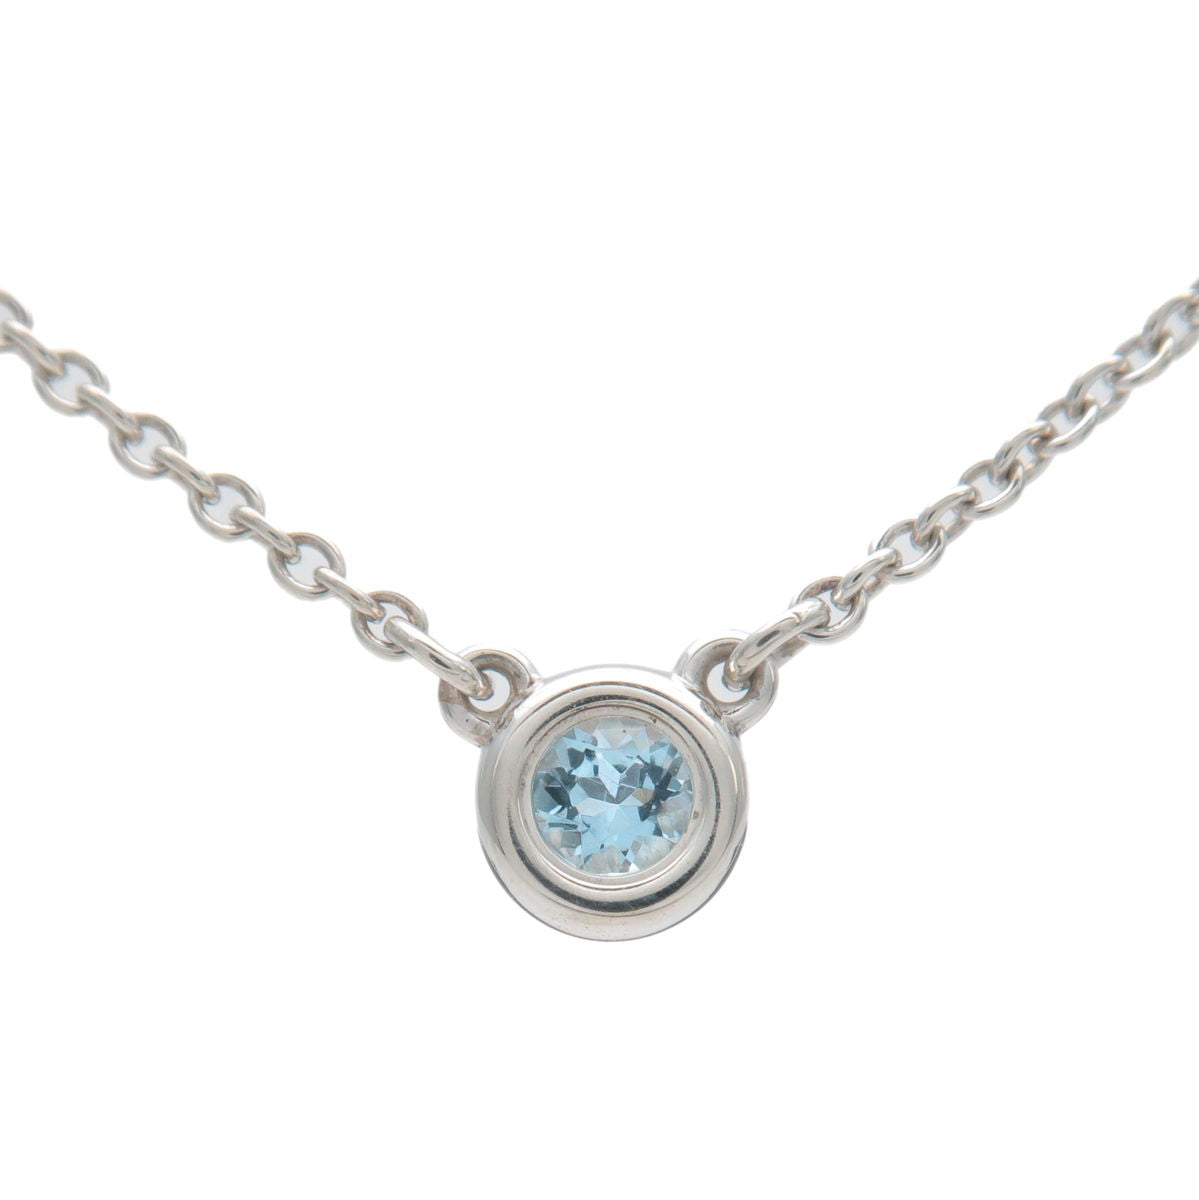 Tiffany&Co.-By-The-Yard-1P-Aquamarine-Necklace-0.13ct-SV925-Silver